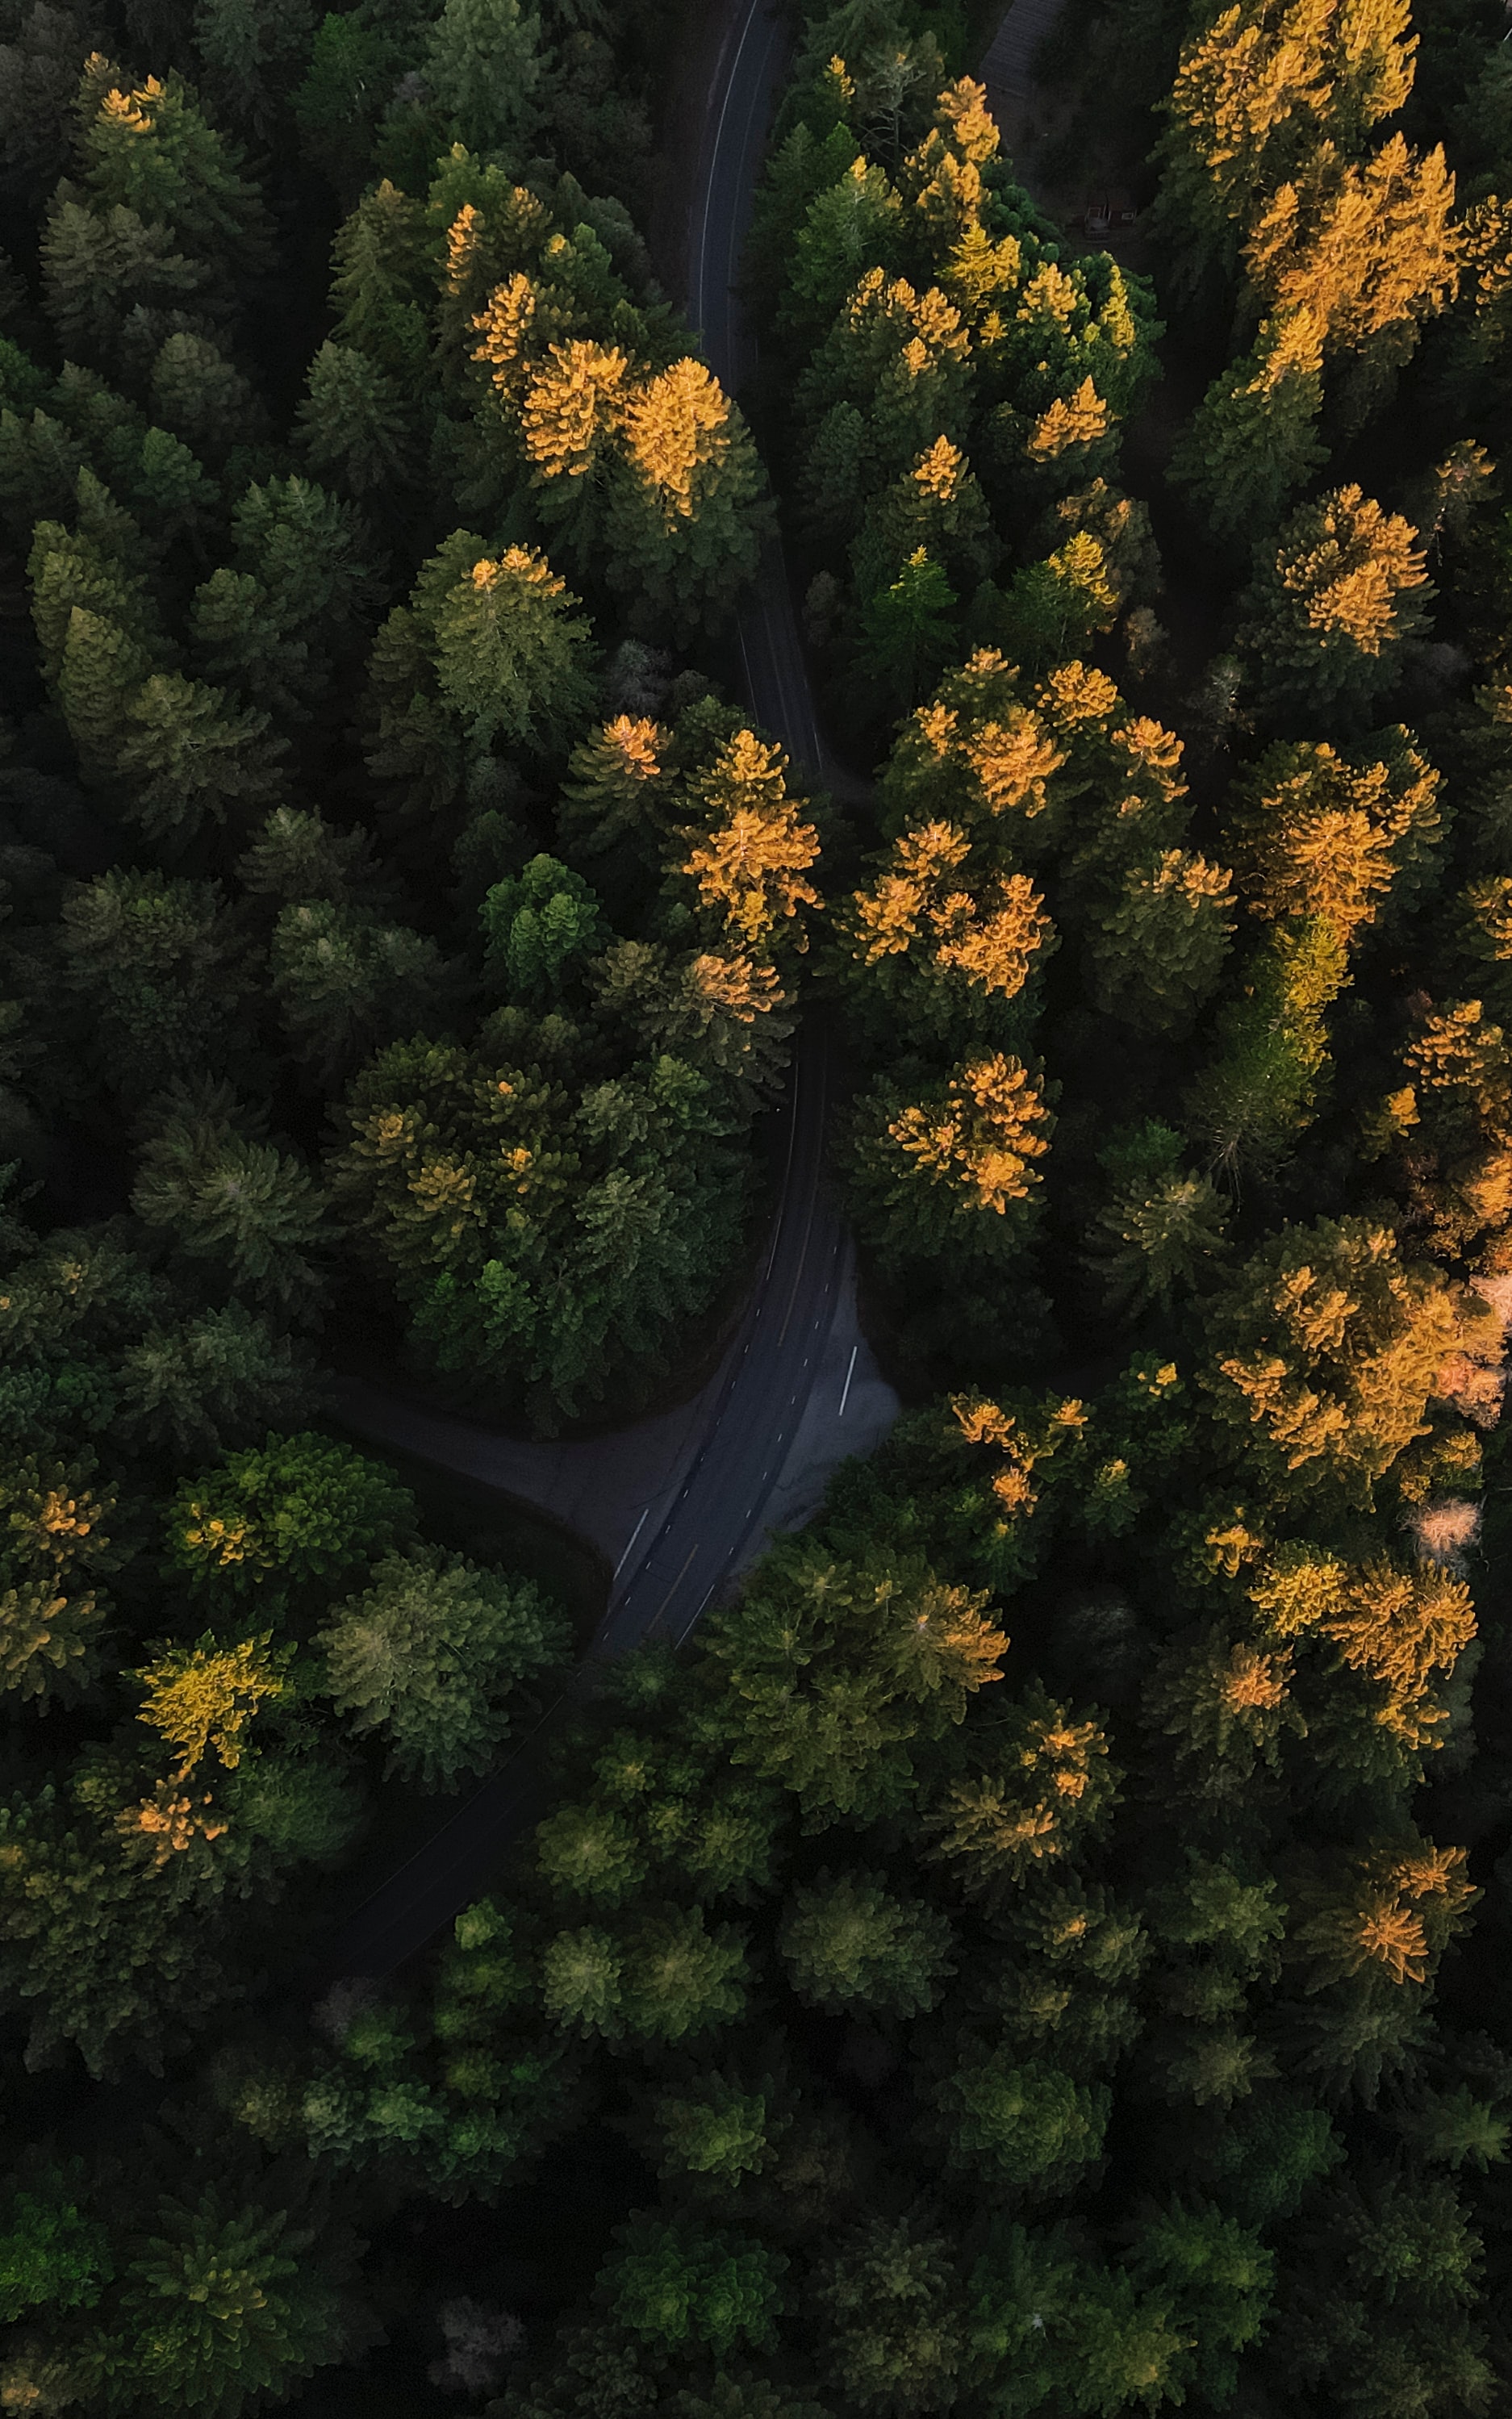 view from above, nature, trees, road, forest, winding, sinuous wallpapers for tablet